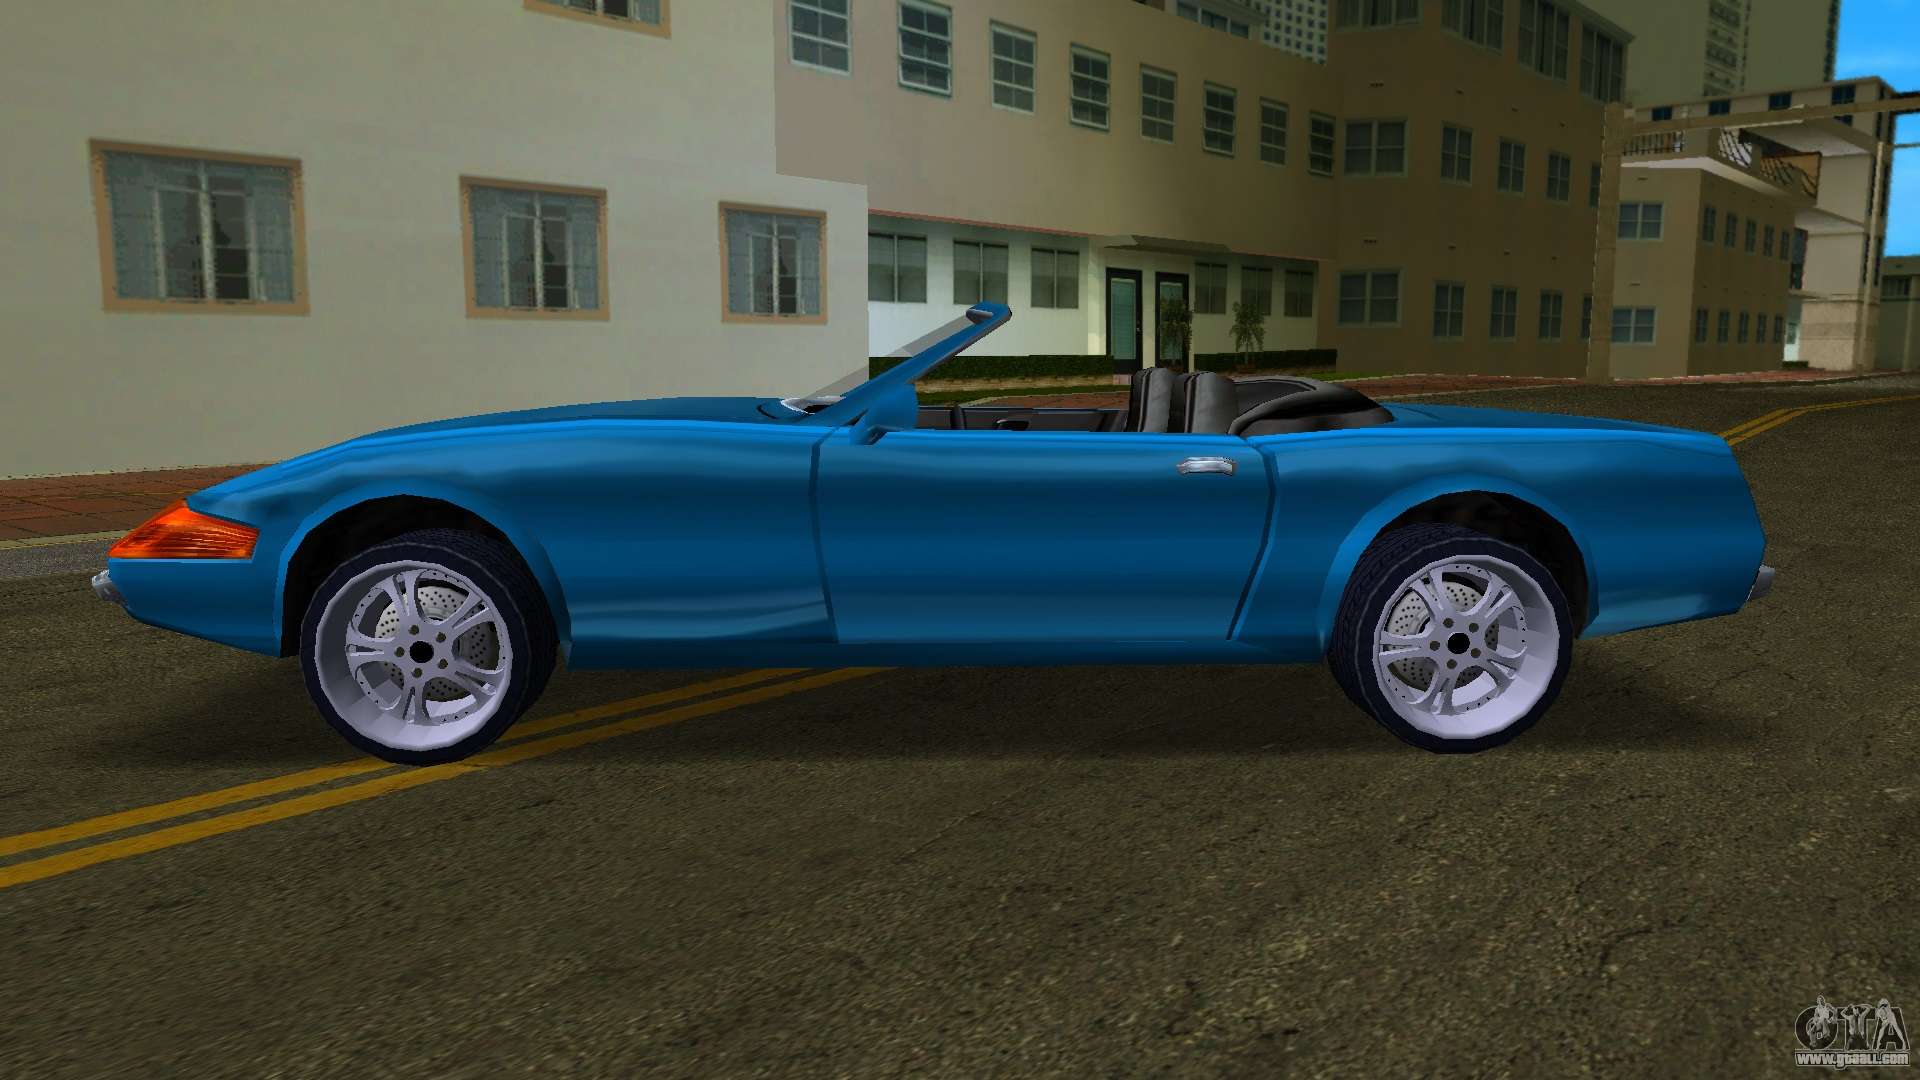 The fastest cars in GTA Vice City - Hotring, Stinger, Phoenix, and